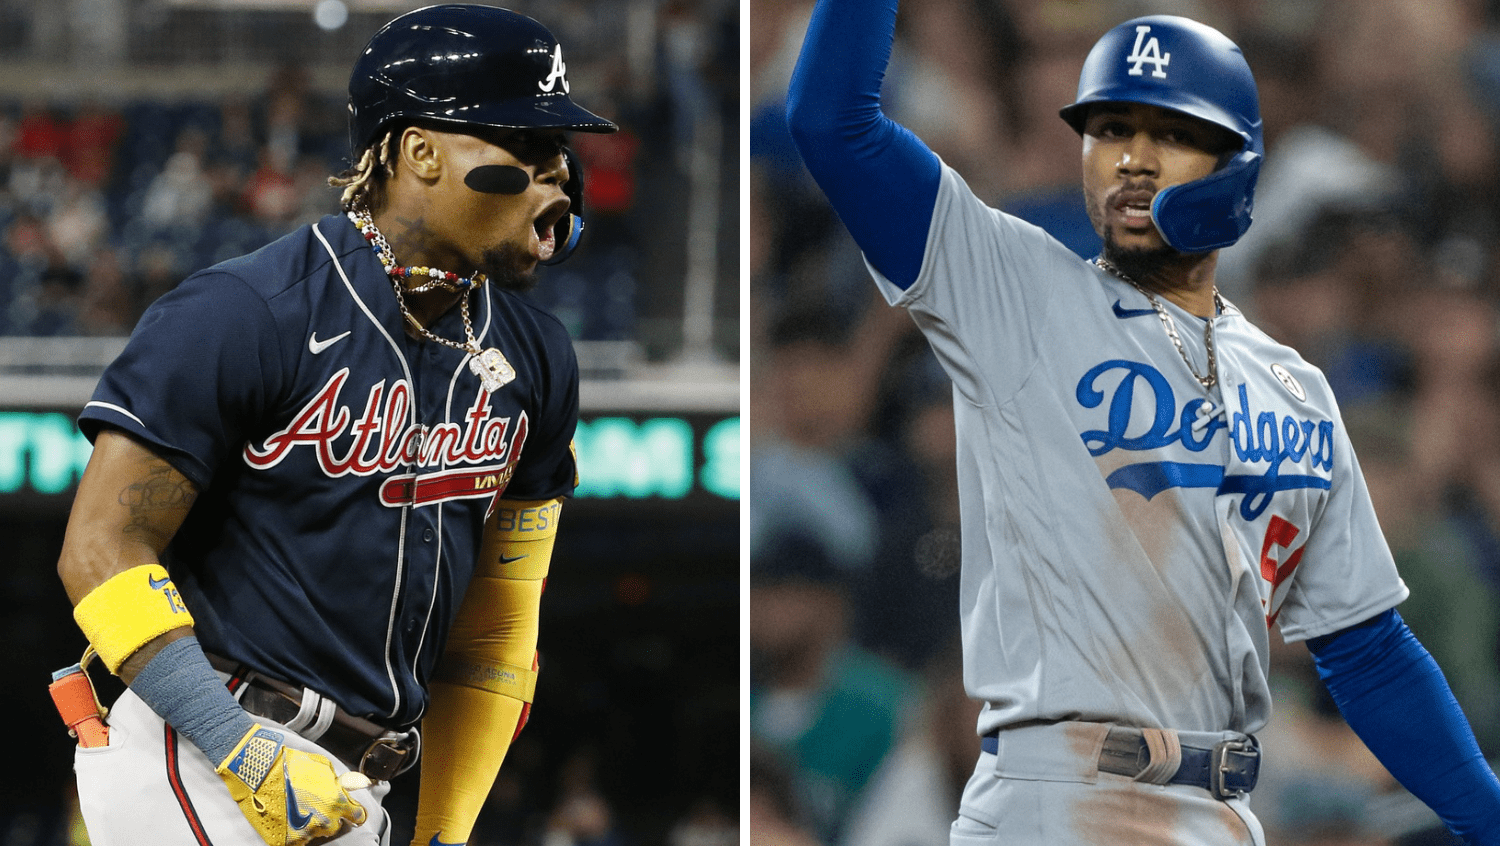 World Series: Astros are favored despite being tied with Braves